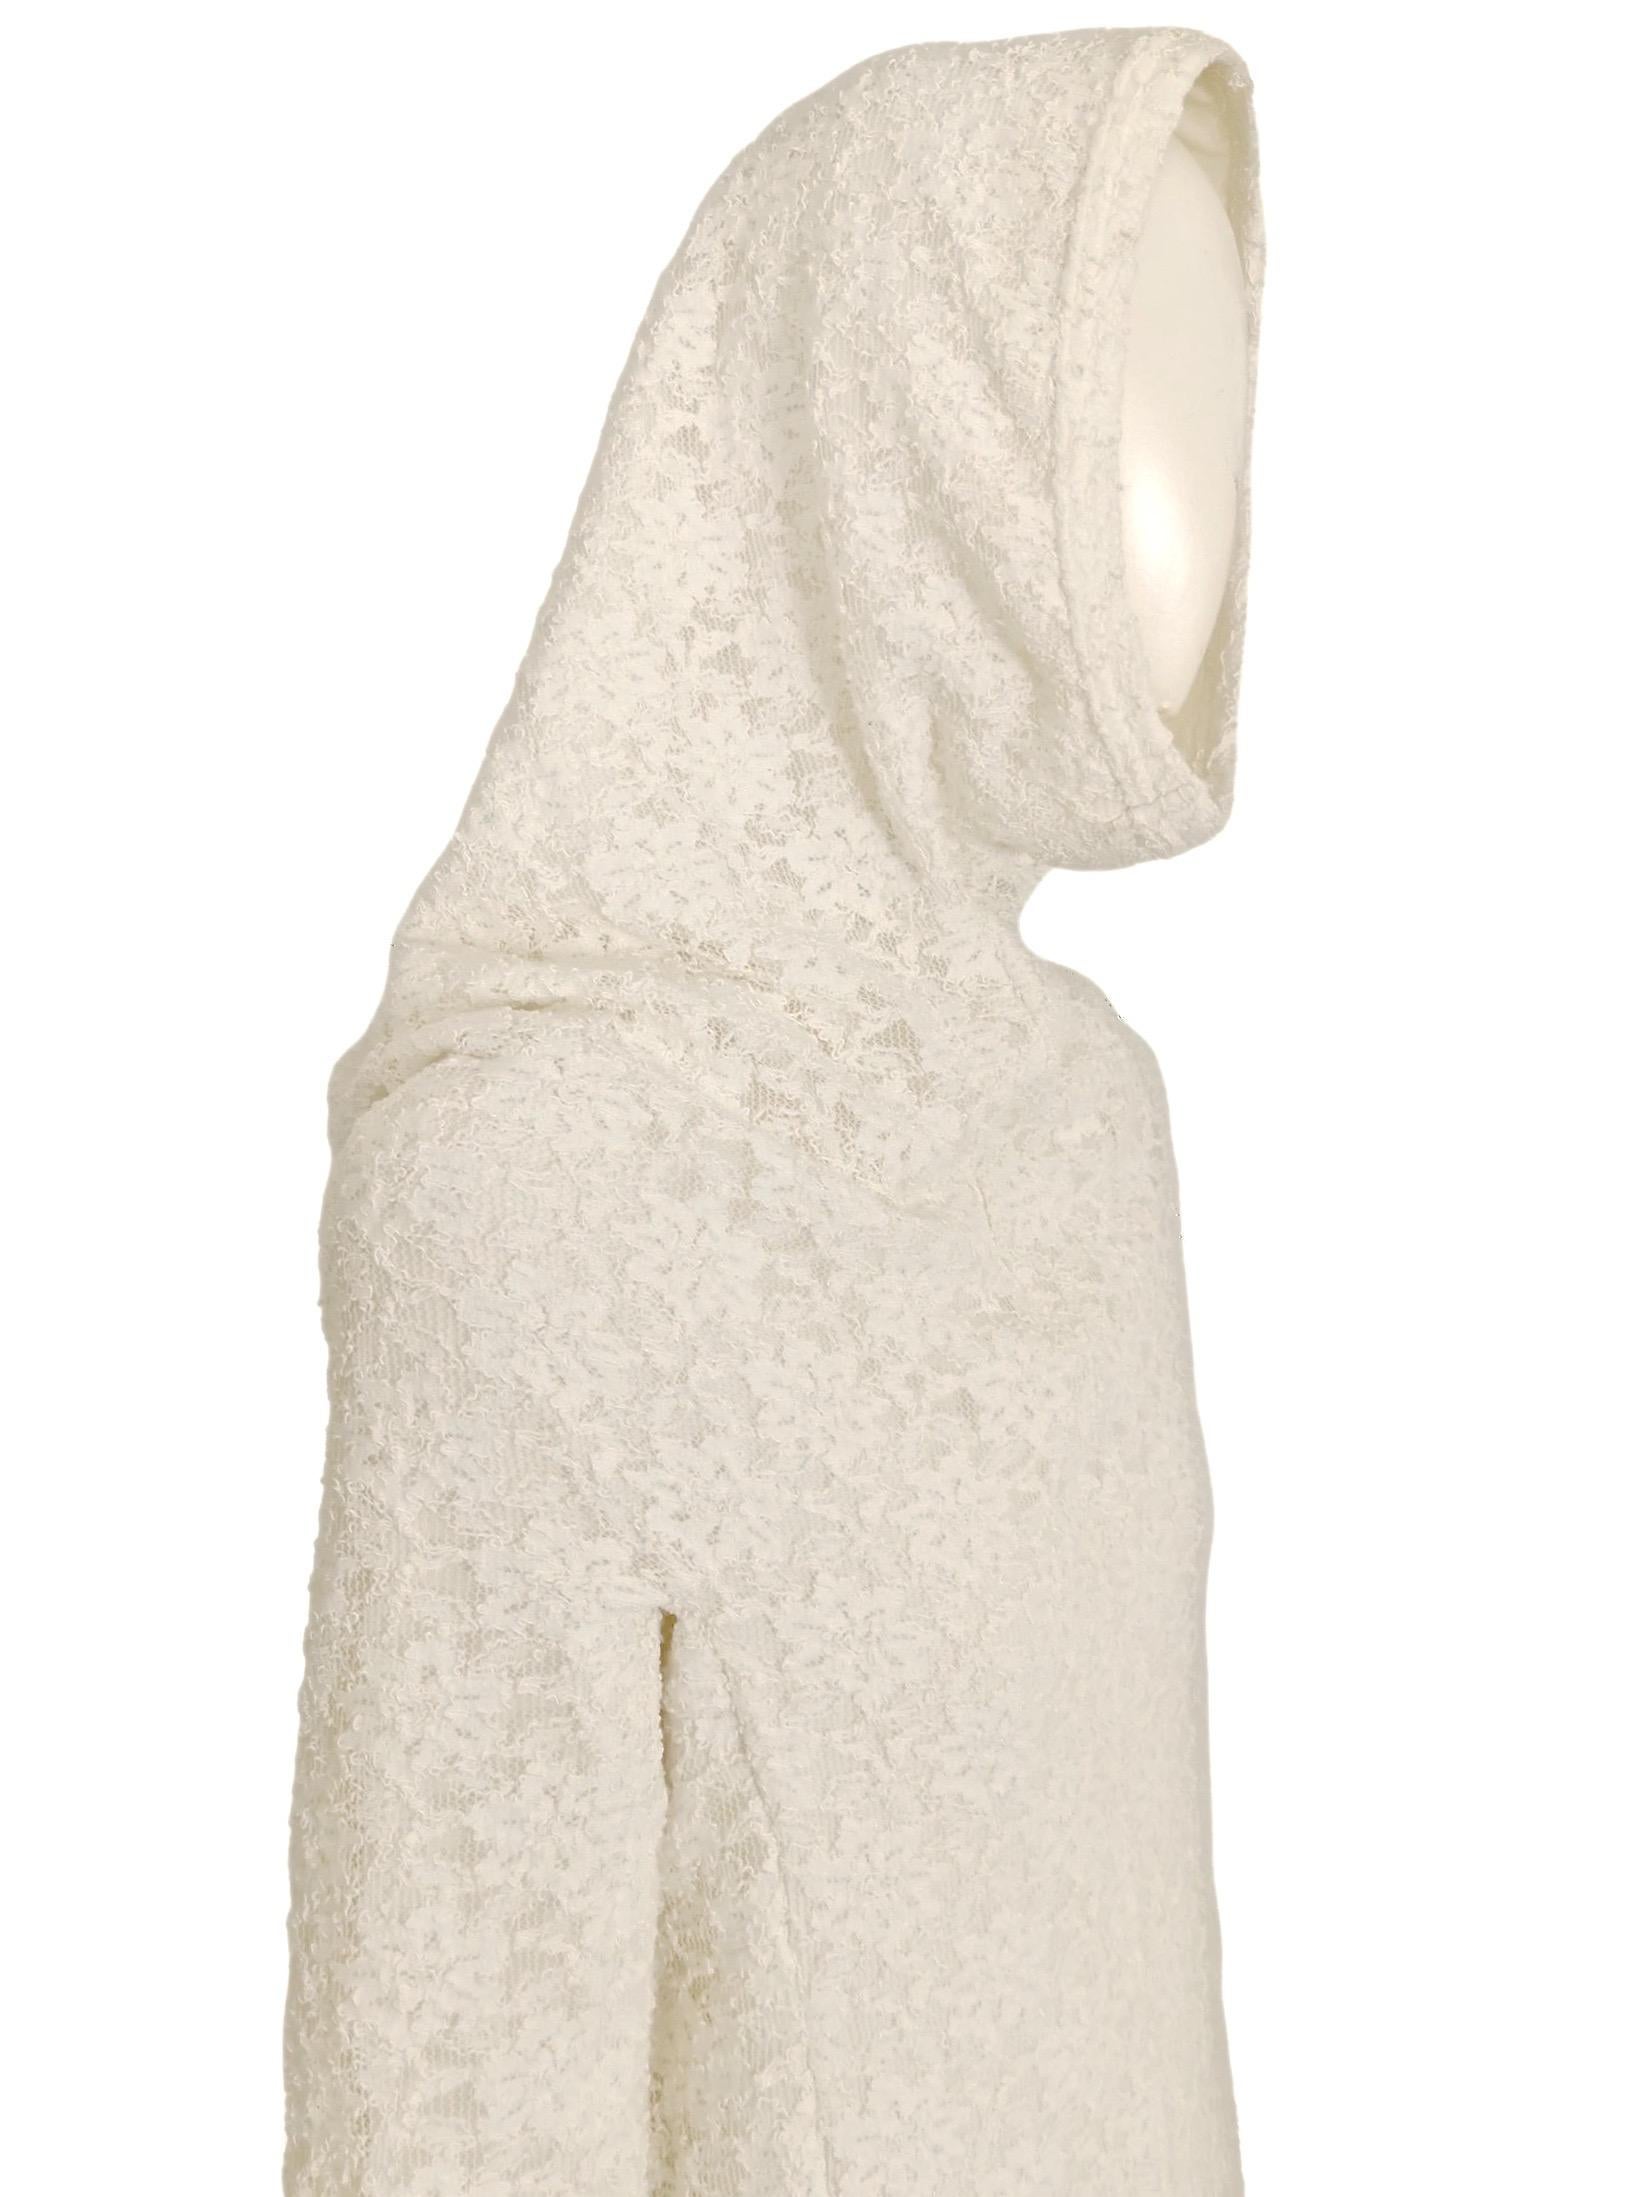 Comme Des Garcons White Drama Cowl Hooded Dress AD 2011 For Sale 12